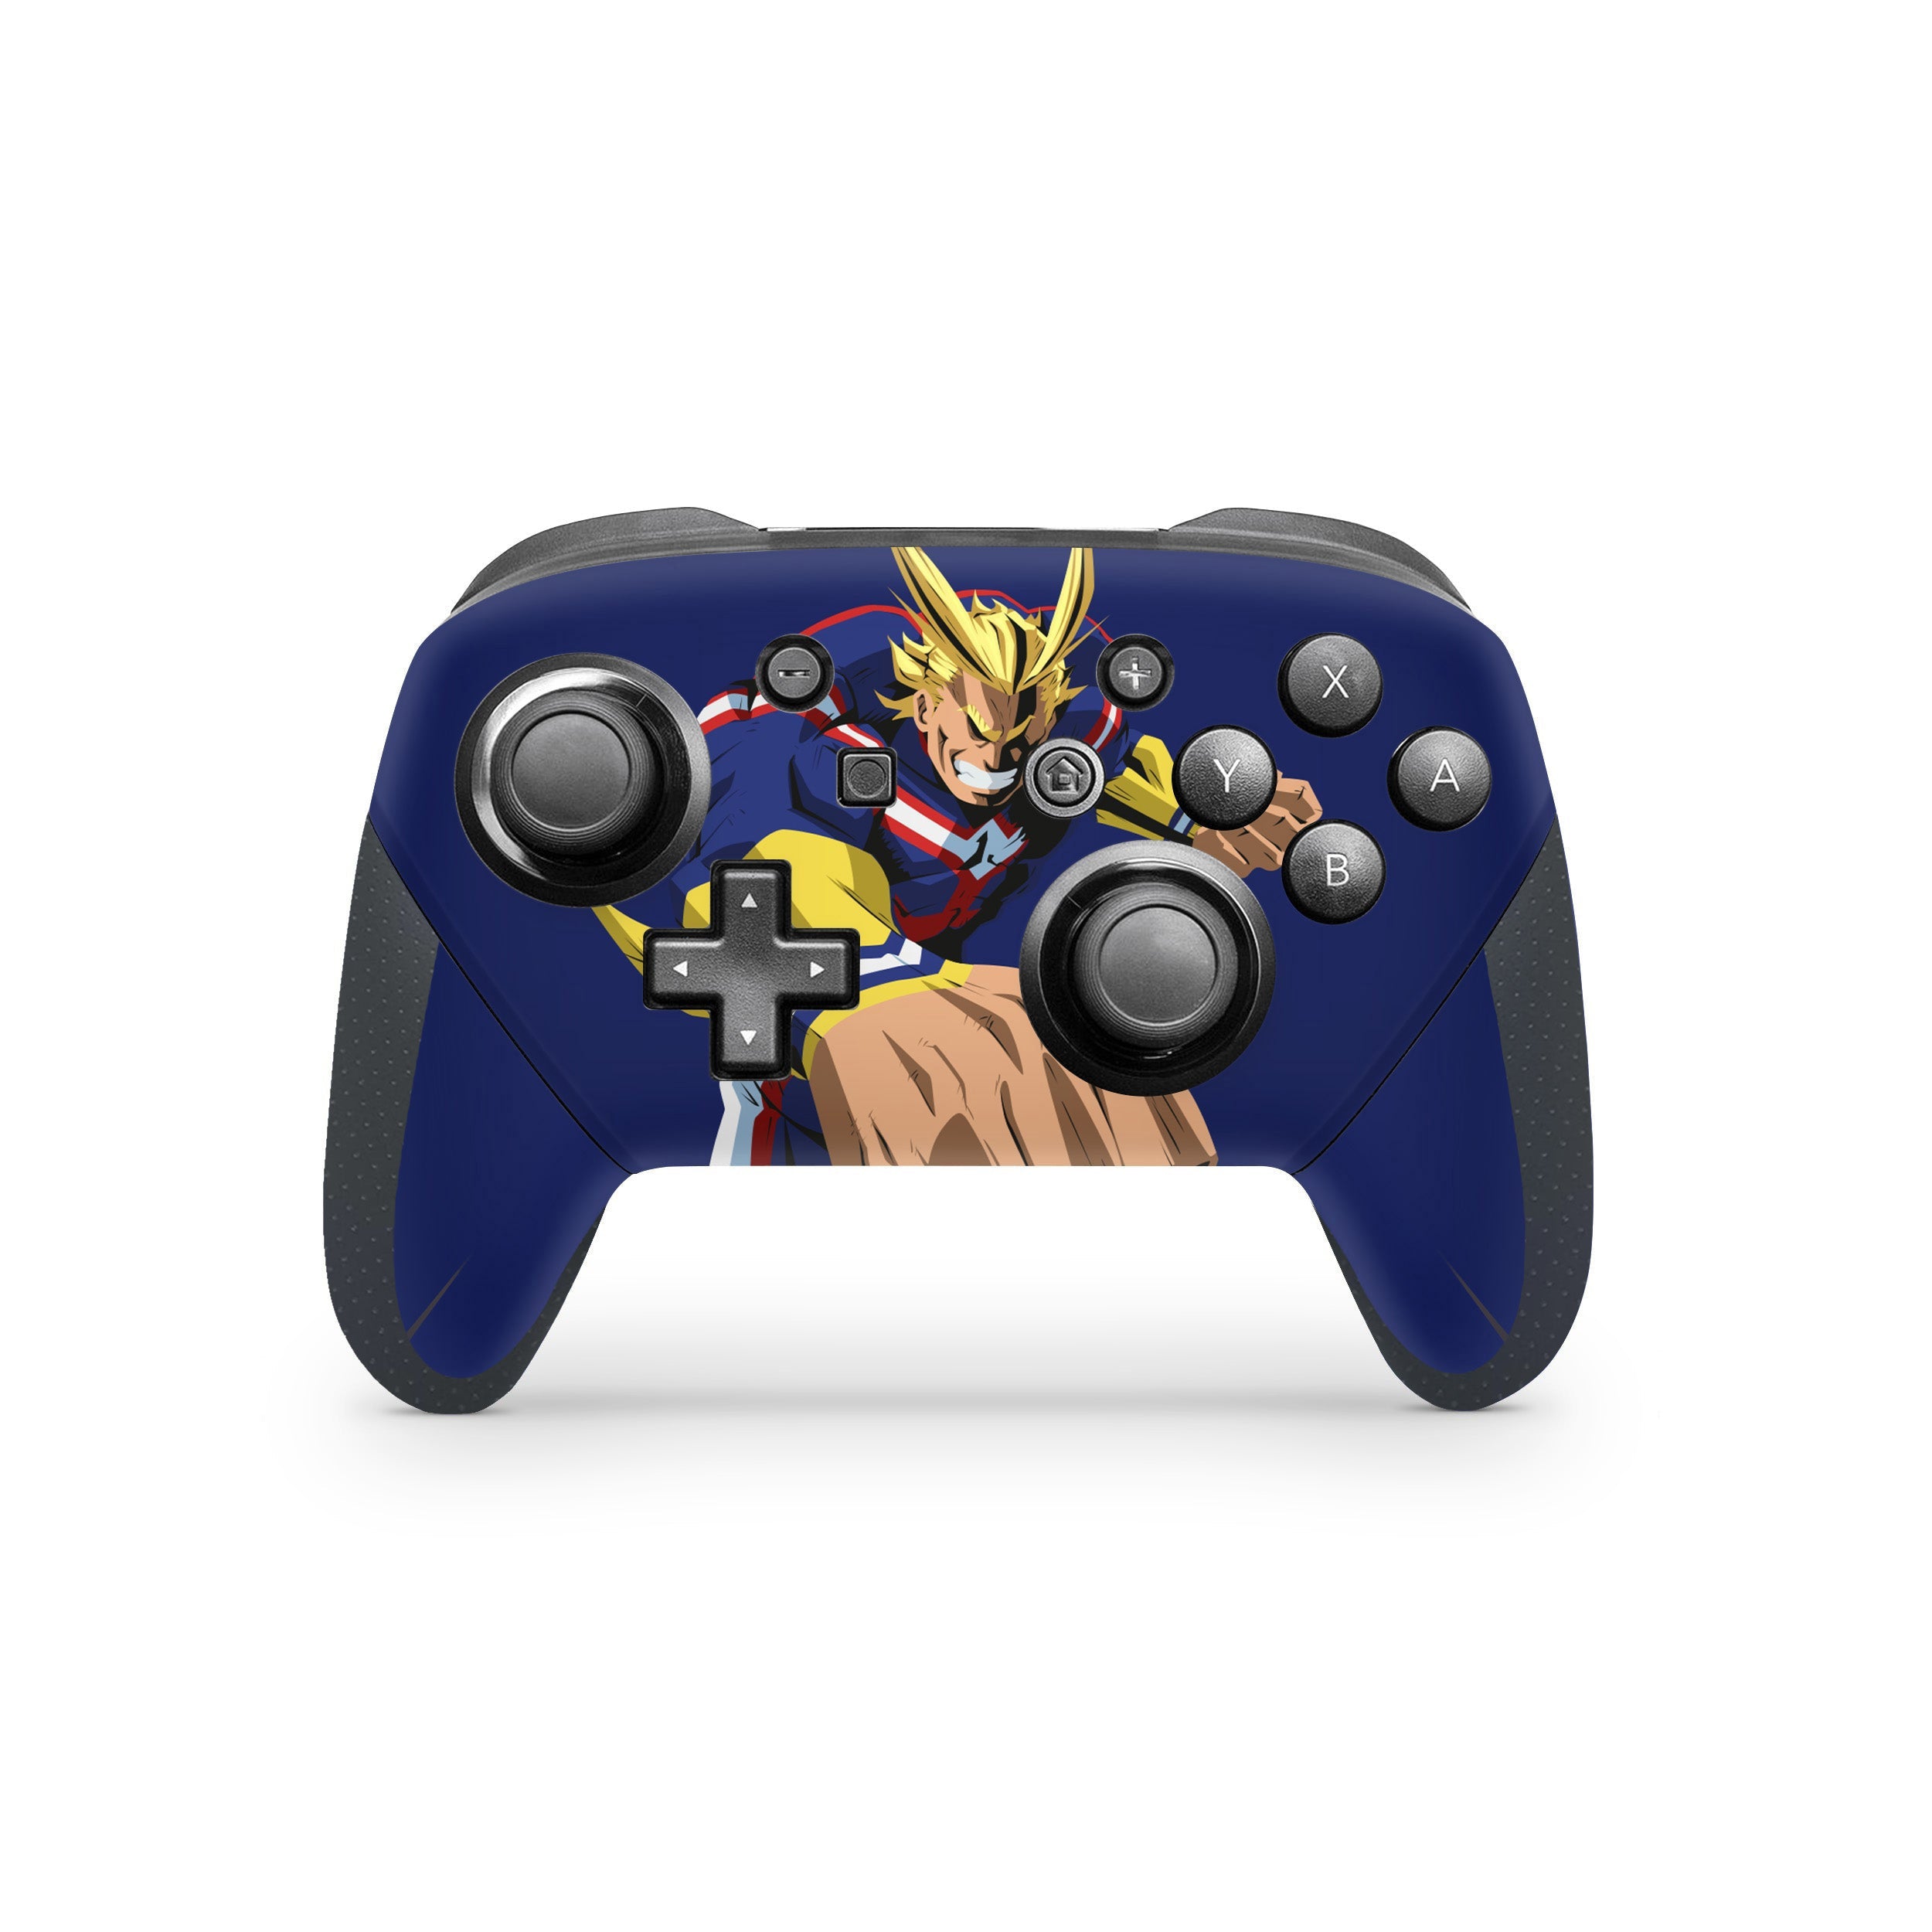 A video game skin featuring a Marvel Comics X Men Wolverine design for the Switch Pro Controller.